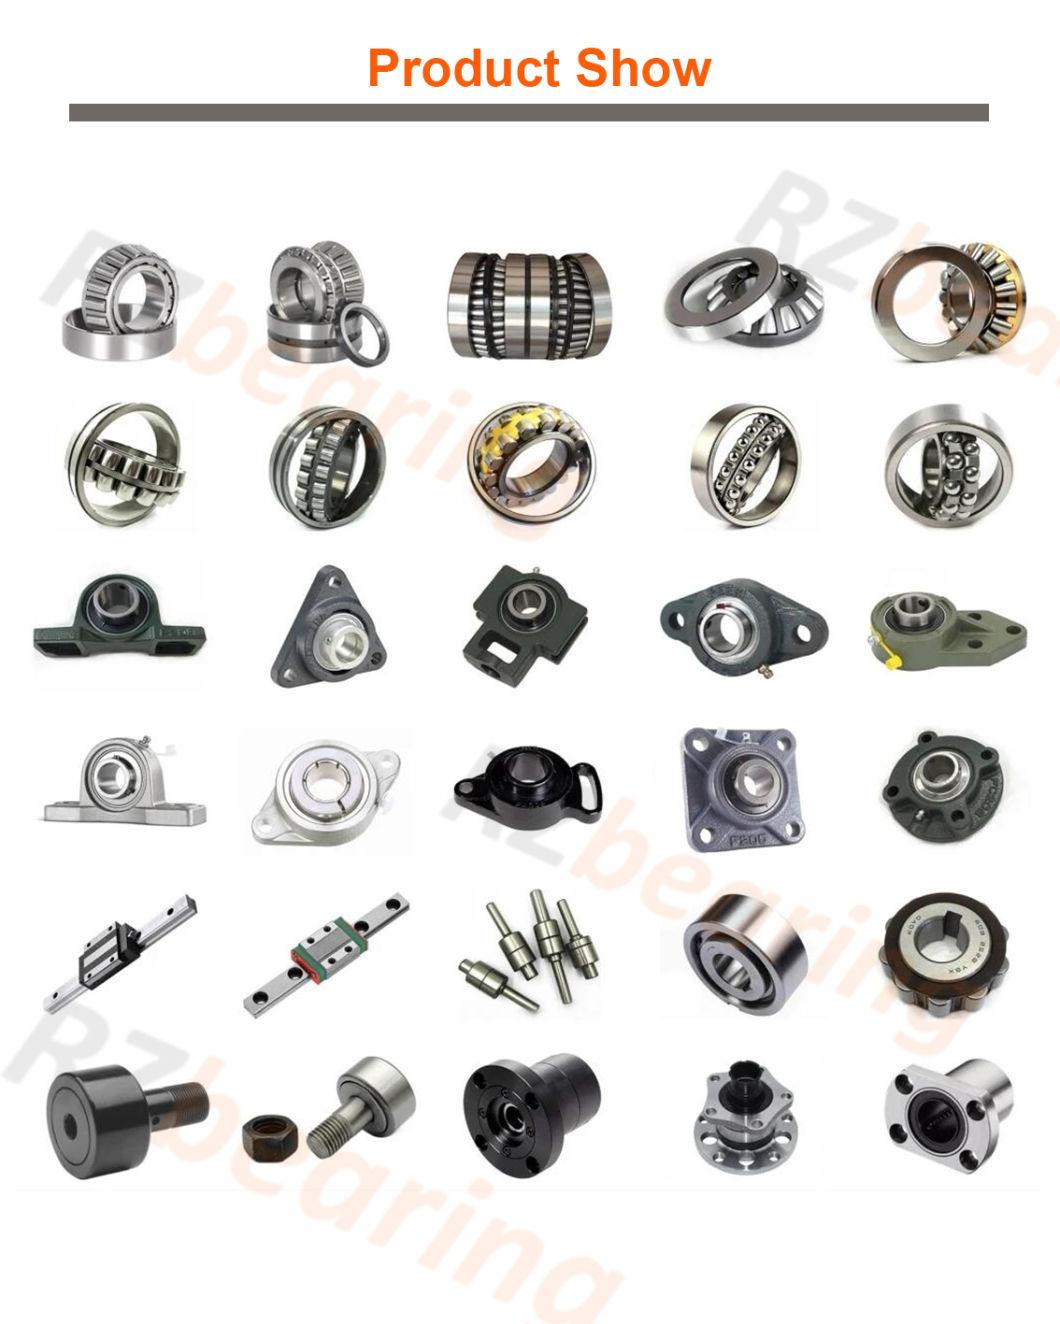 Bearing Factory Price Machinery Engine Parts Deep Groove Ball Bearing 6417 with High Quality